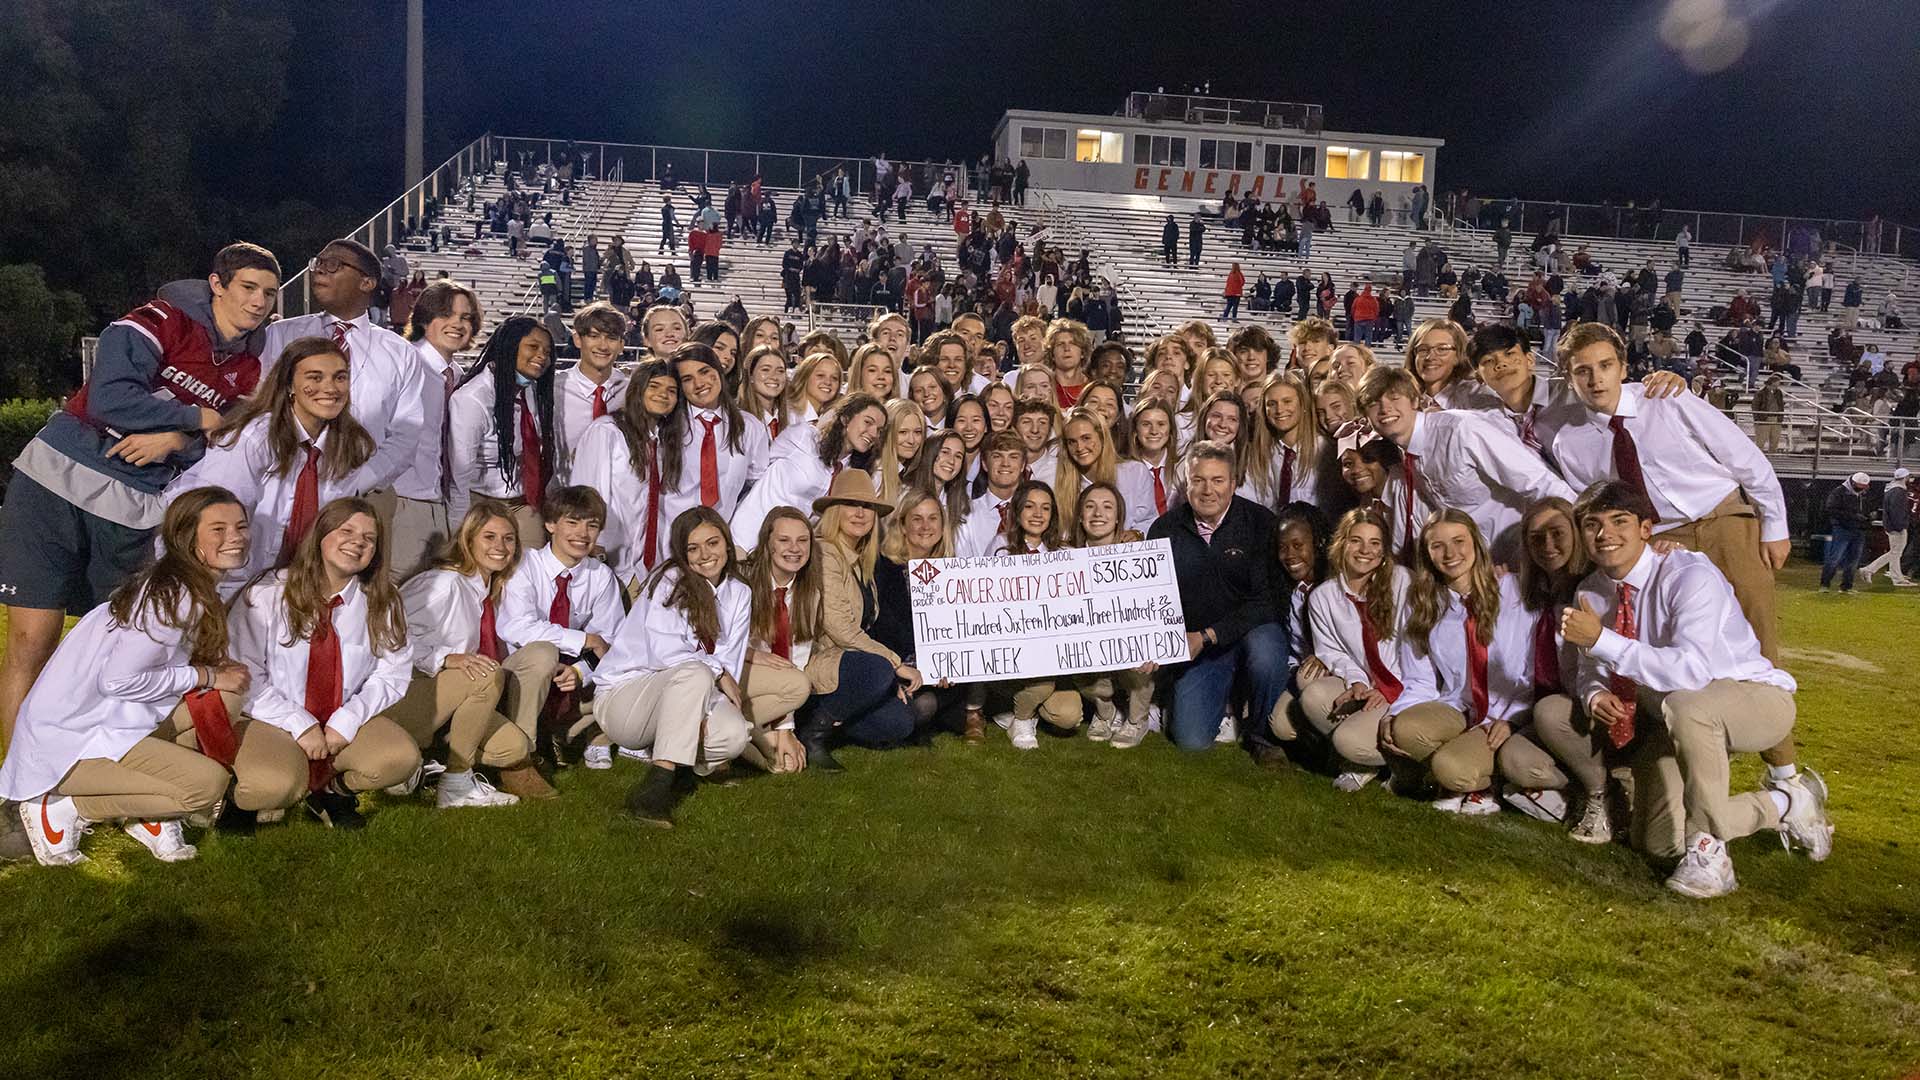 The check reveal from the 2021 Spirit Week benefiting Cancer Society of Greenville. Students surround a large check for $316,300.22